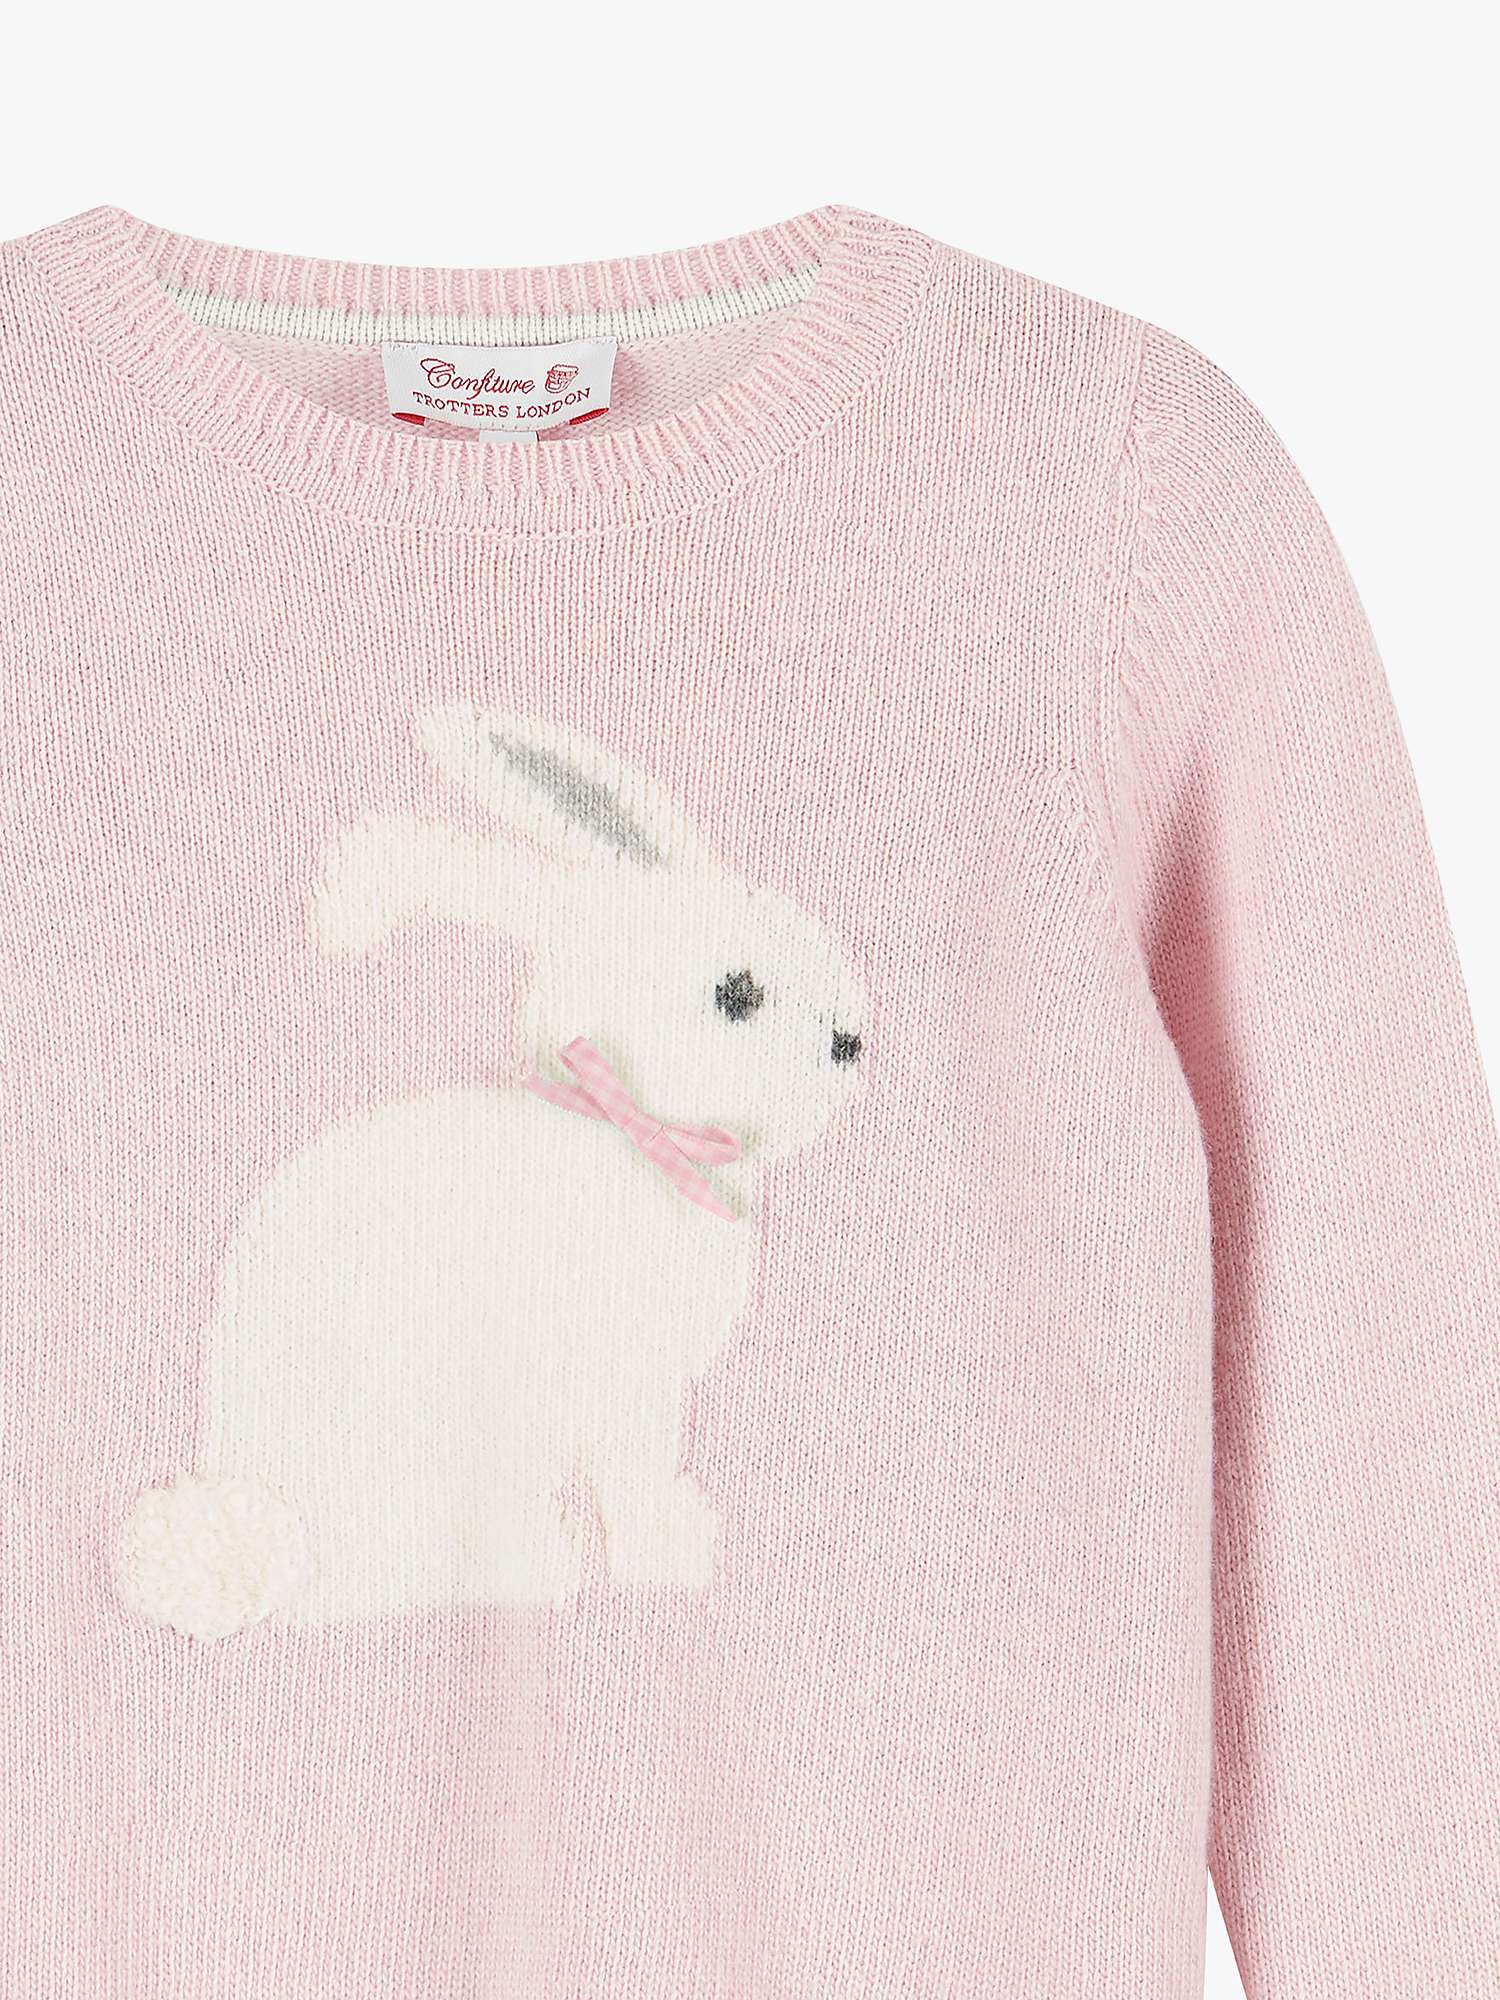 Buy Trotters Kids' Coco Bunny Jumper, Pale Pink Online at johnlewis.com